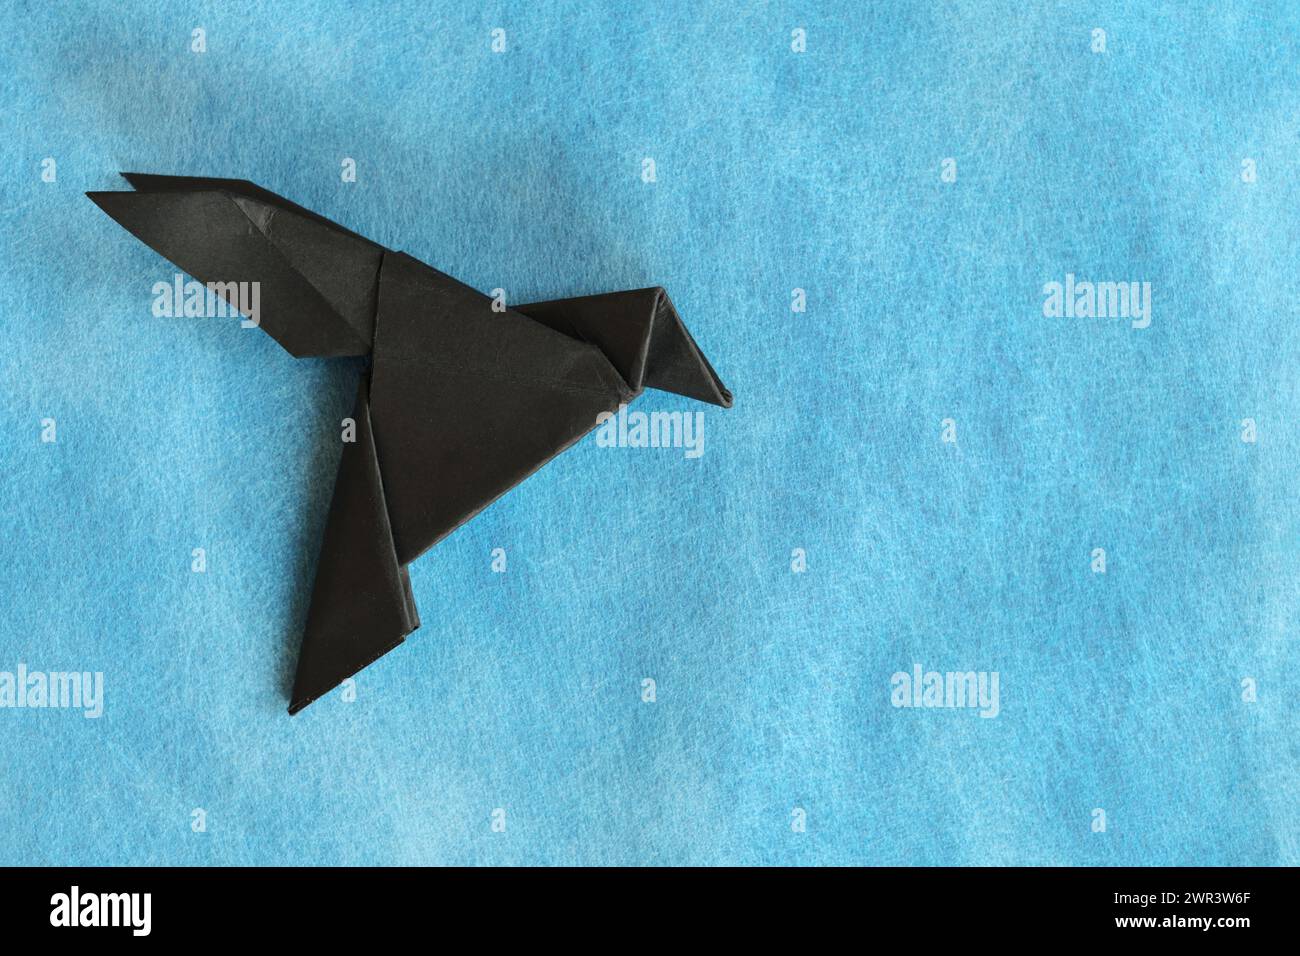 A black paper crow or raven origami isolated in blue background. Stock Photo